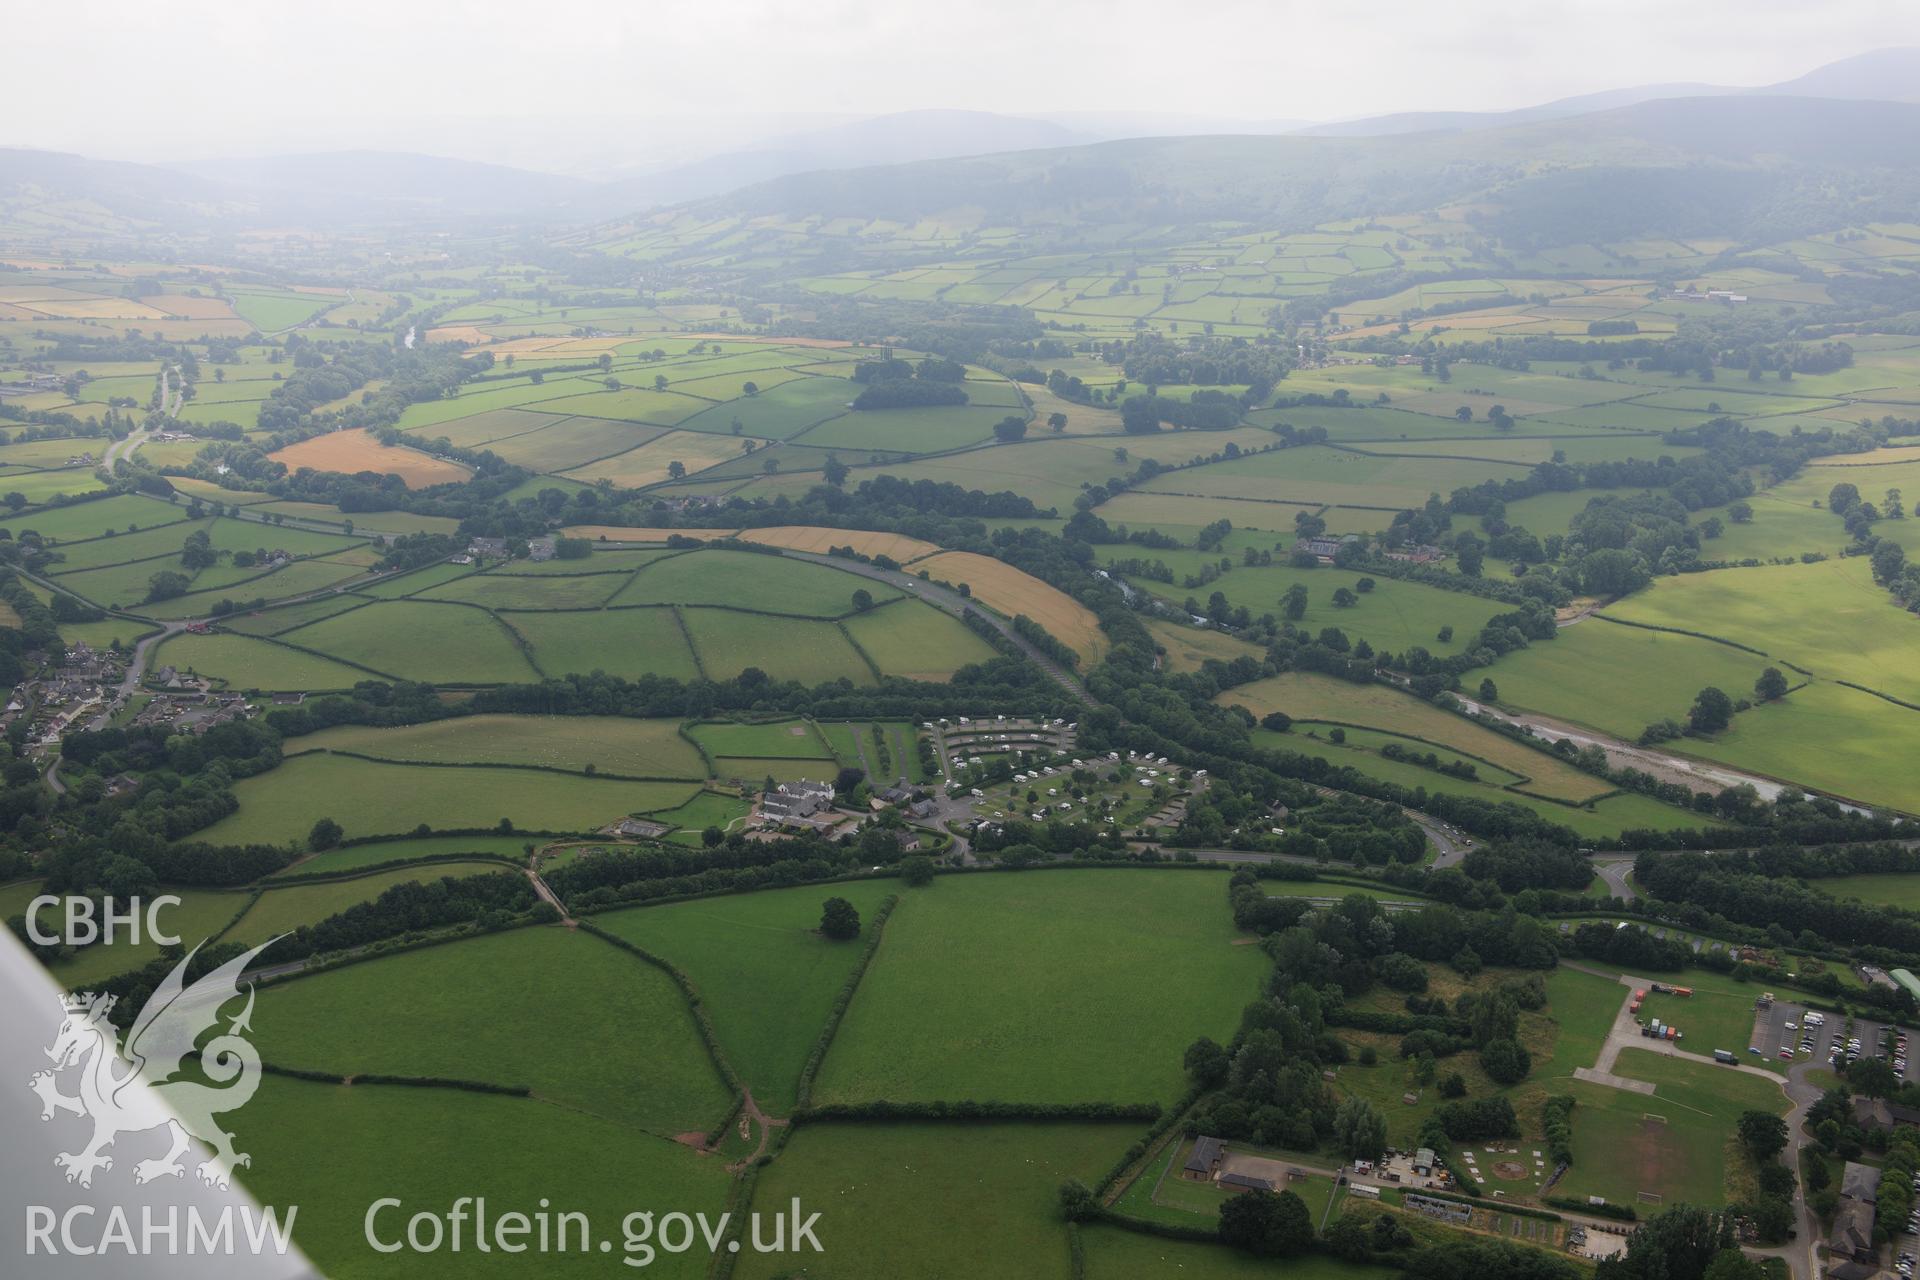 Cefn-brynich Roman fort, distant view from north-west, taken by RCAHMW 1st August 2013.